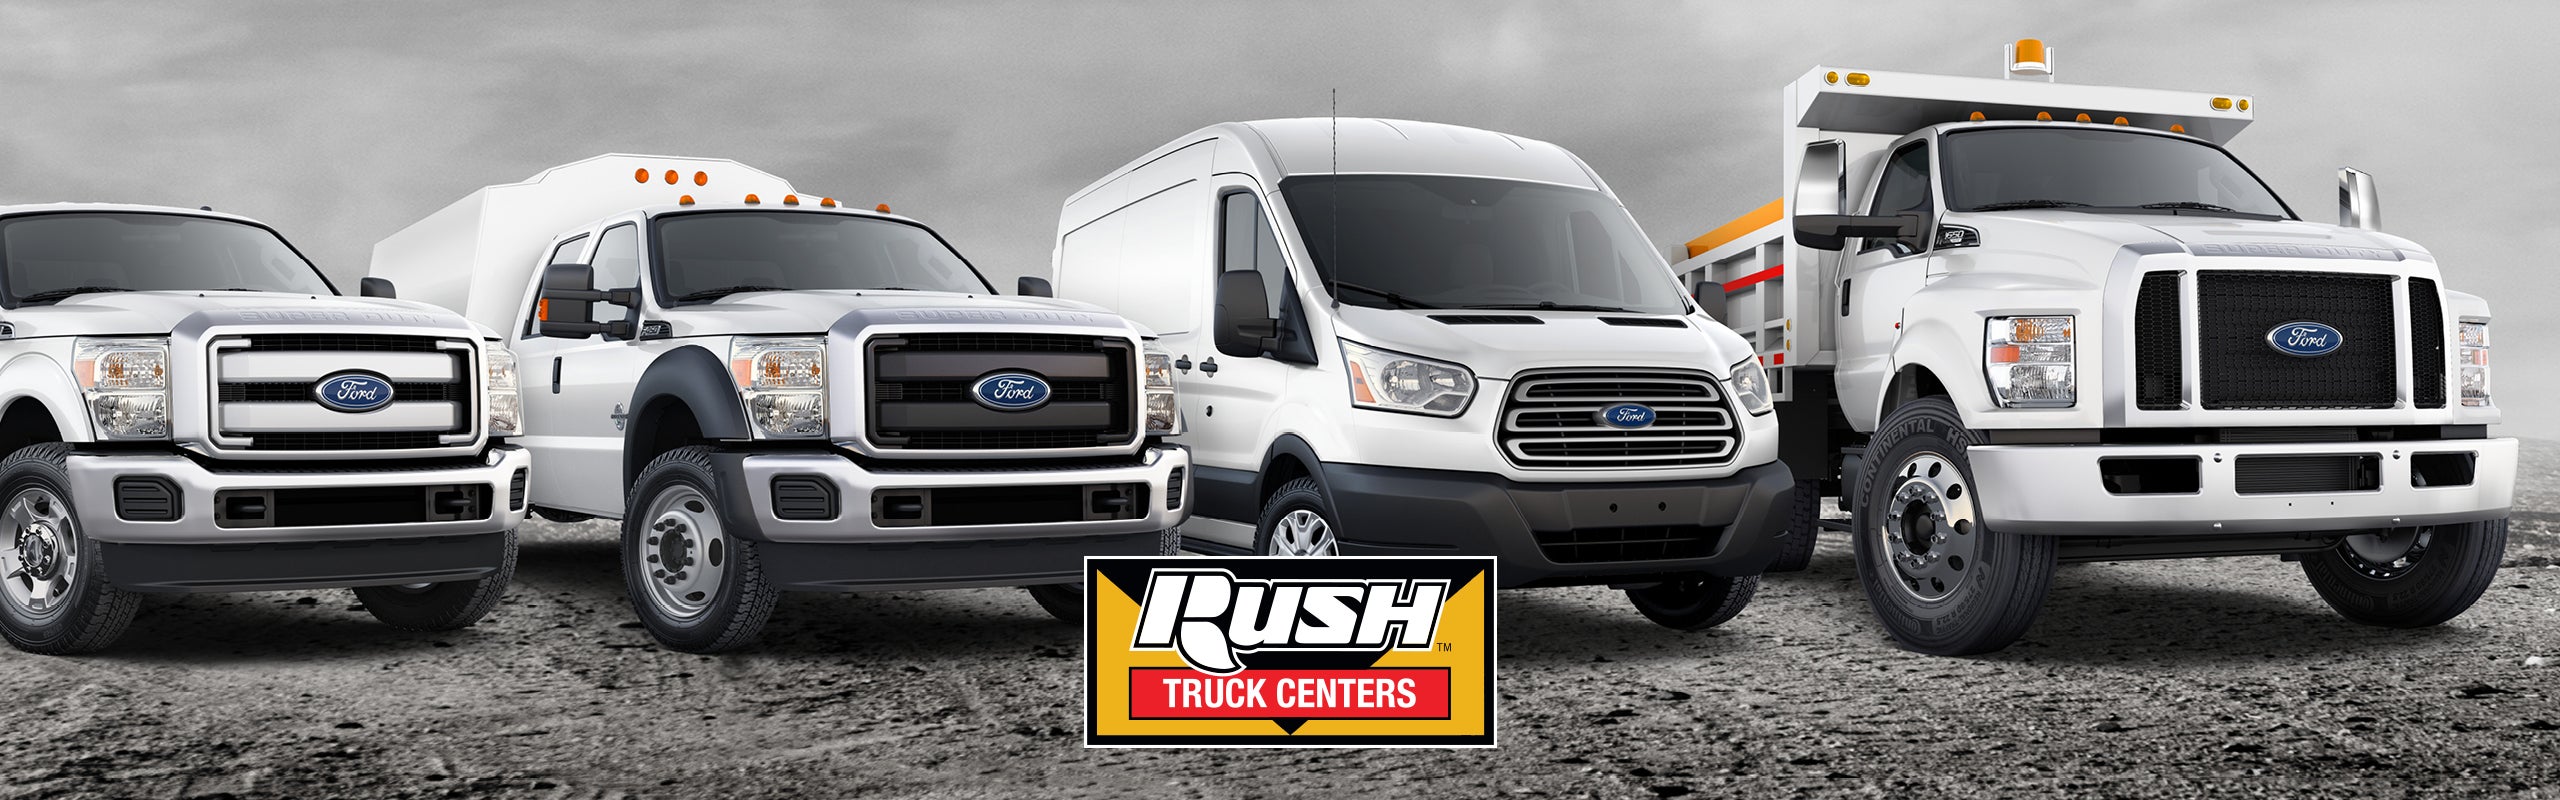 Rush Truck Center New Commercial Vehicles in San Diego, CA